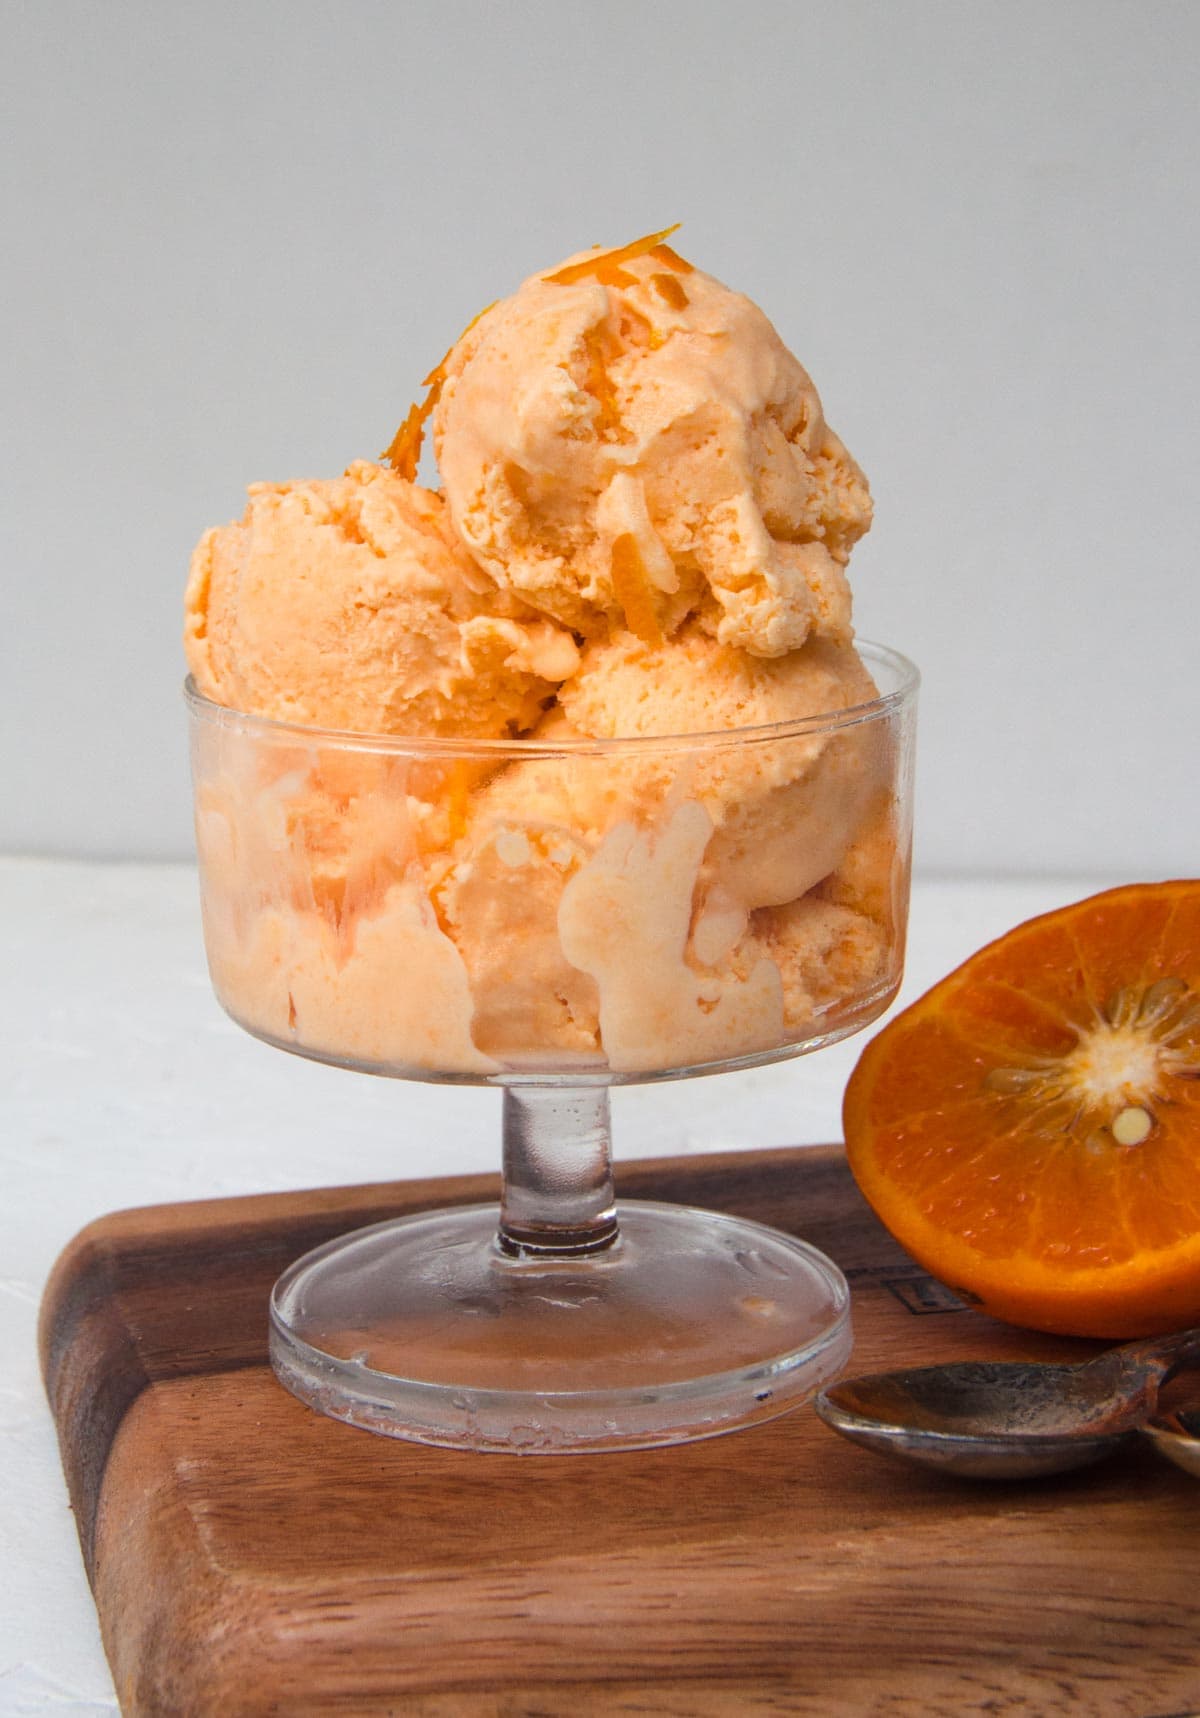 Orange ice ream scoop served in glass cup with orange on the side.